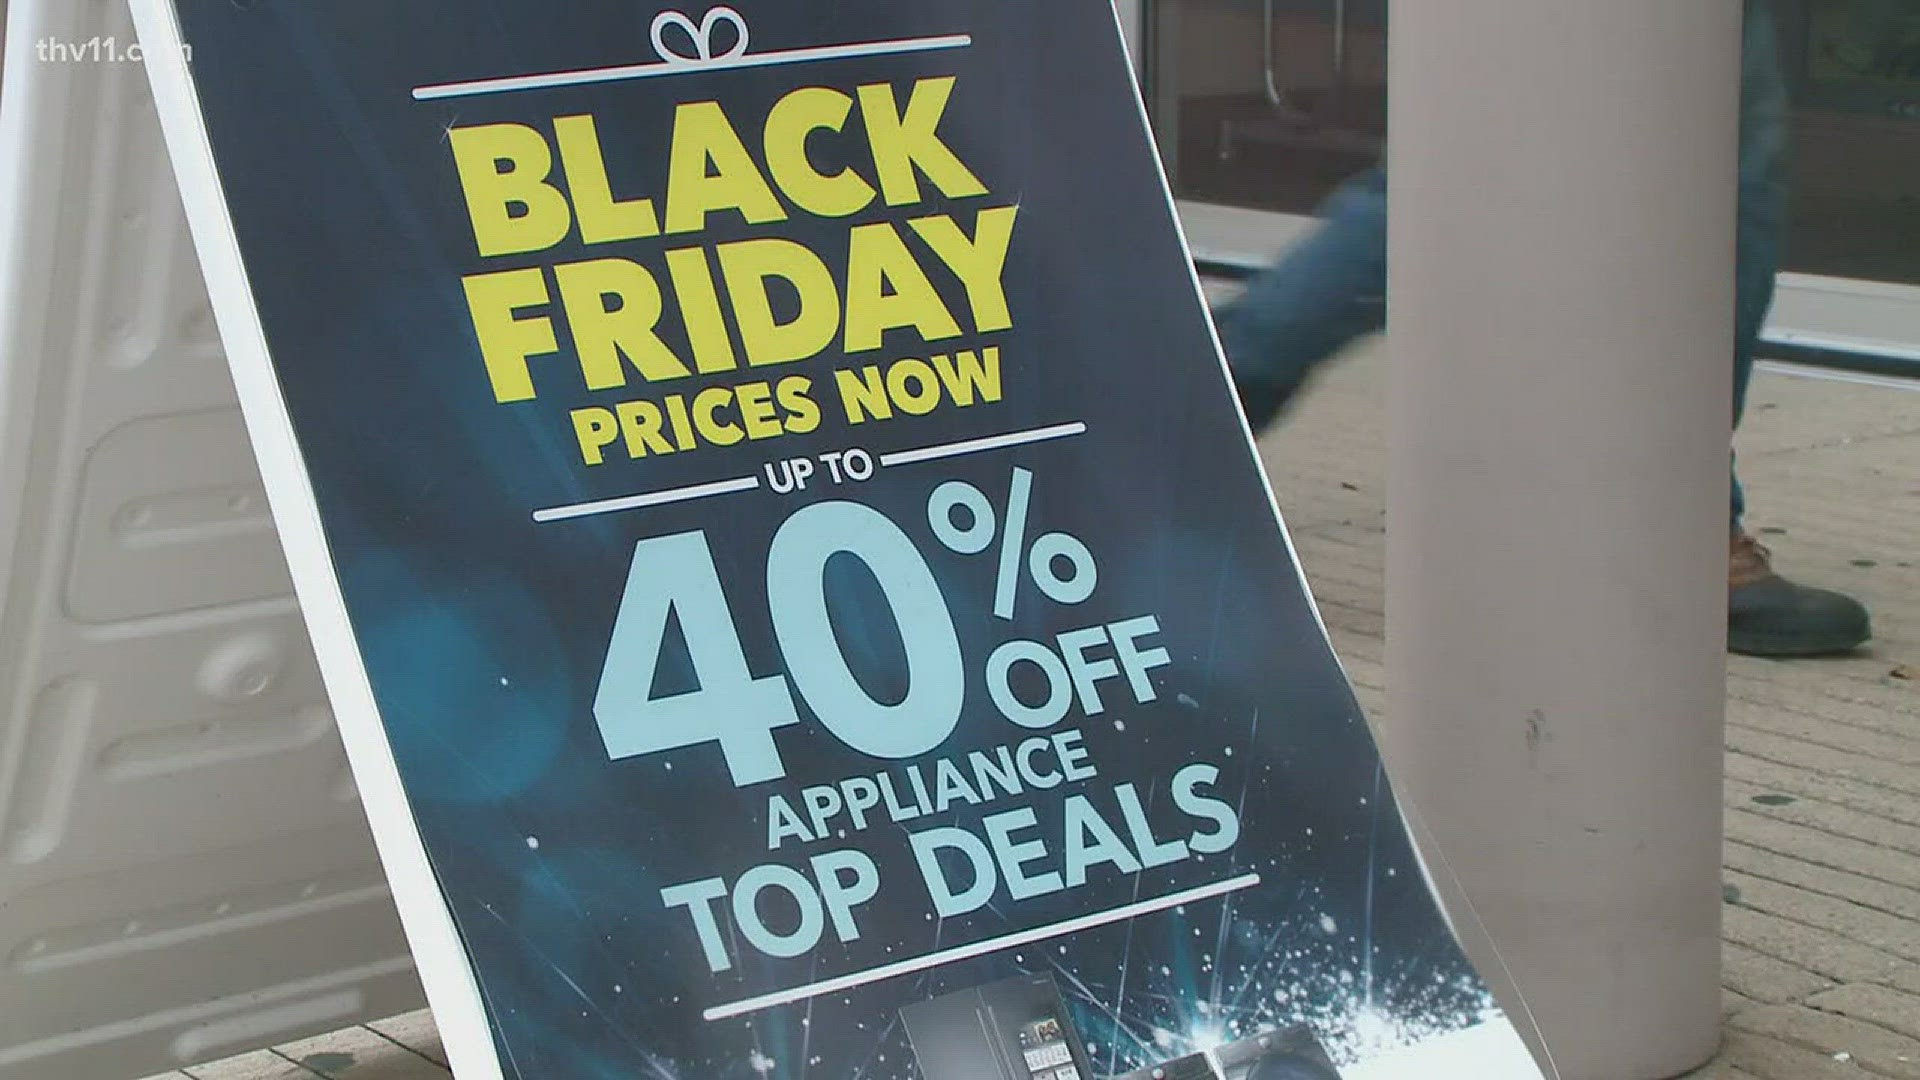 We examine whether or not Black Friday is actually saving customers money.